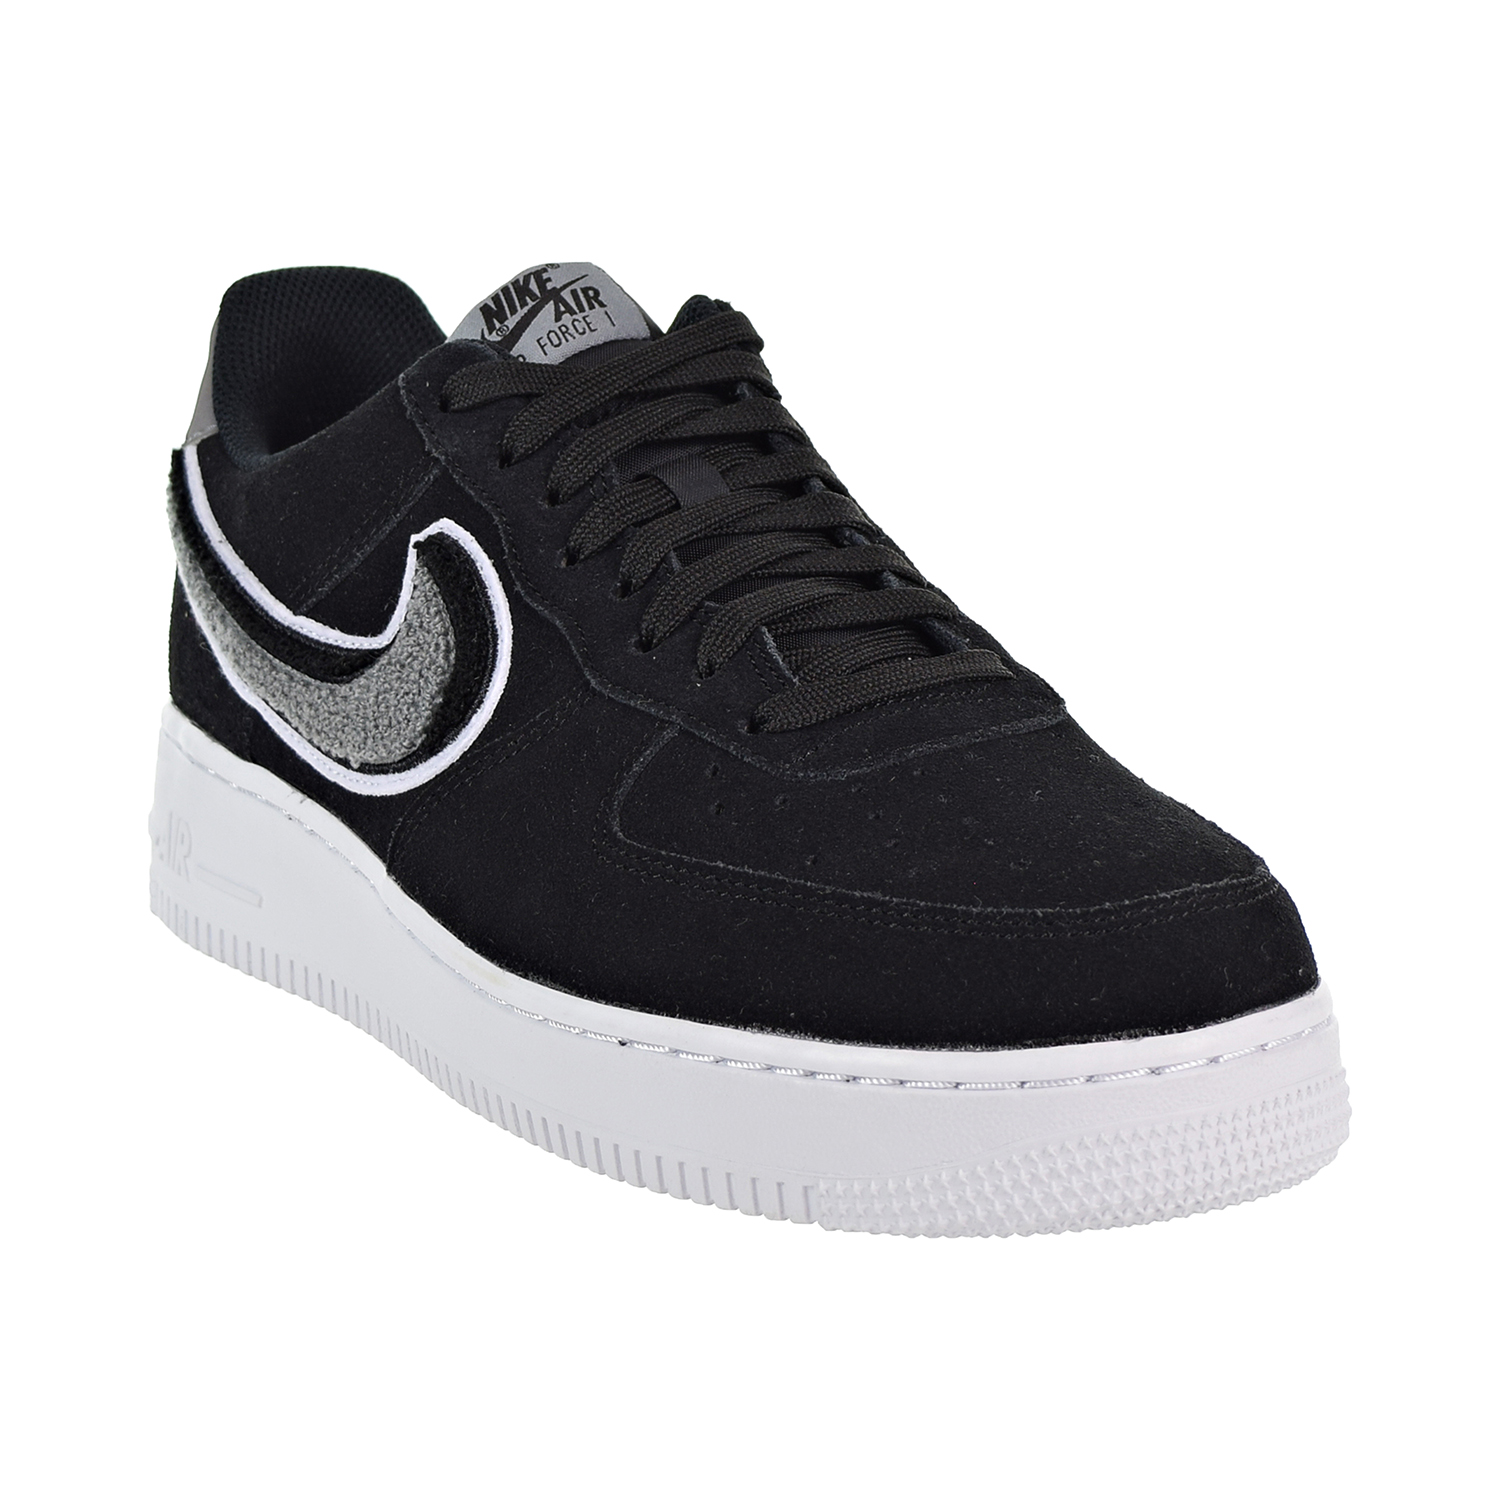 Nike Air Force 1 Low 07 LV8 Men's Shoes Black/Cool Grey/White